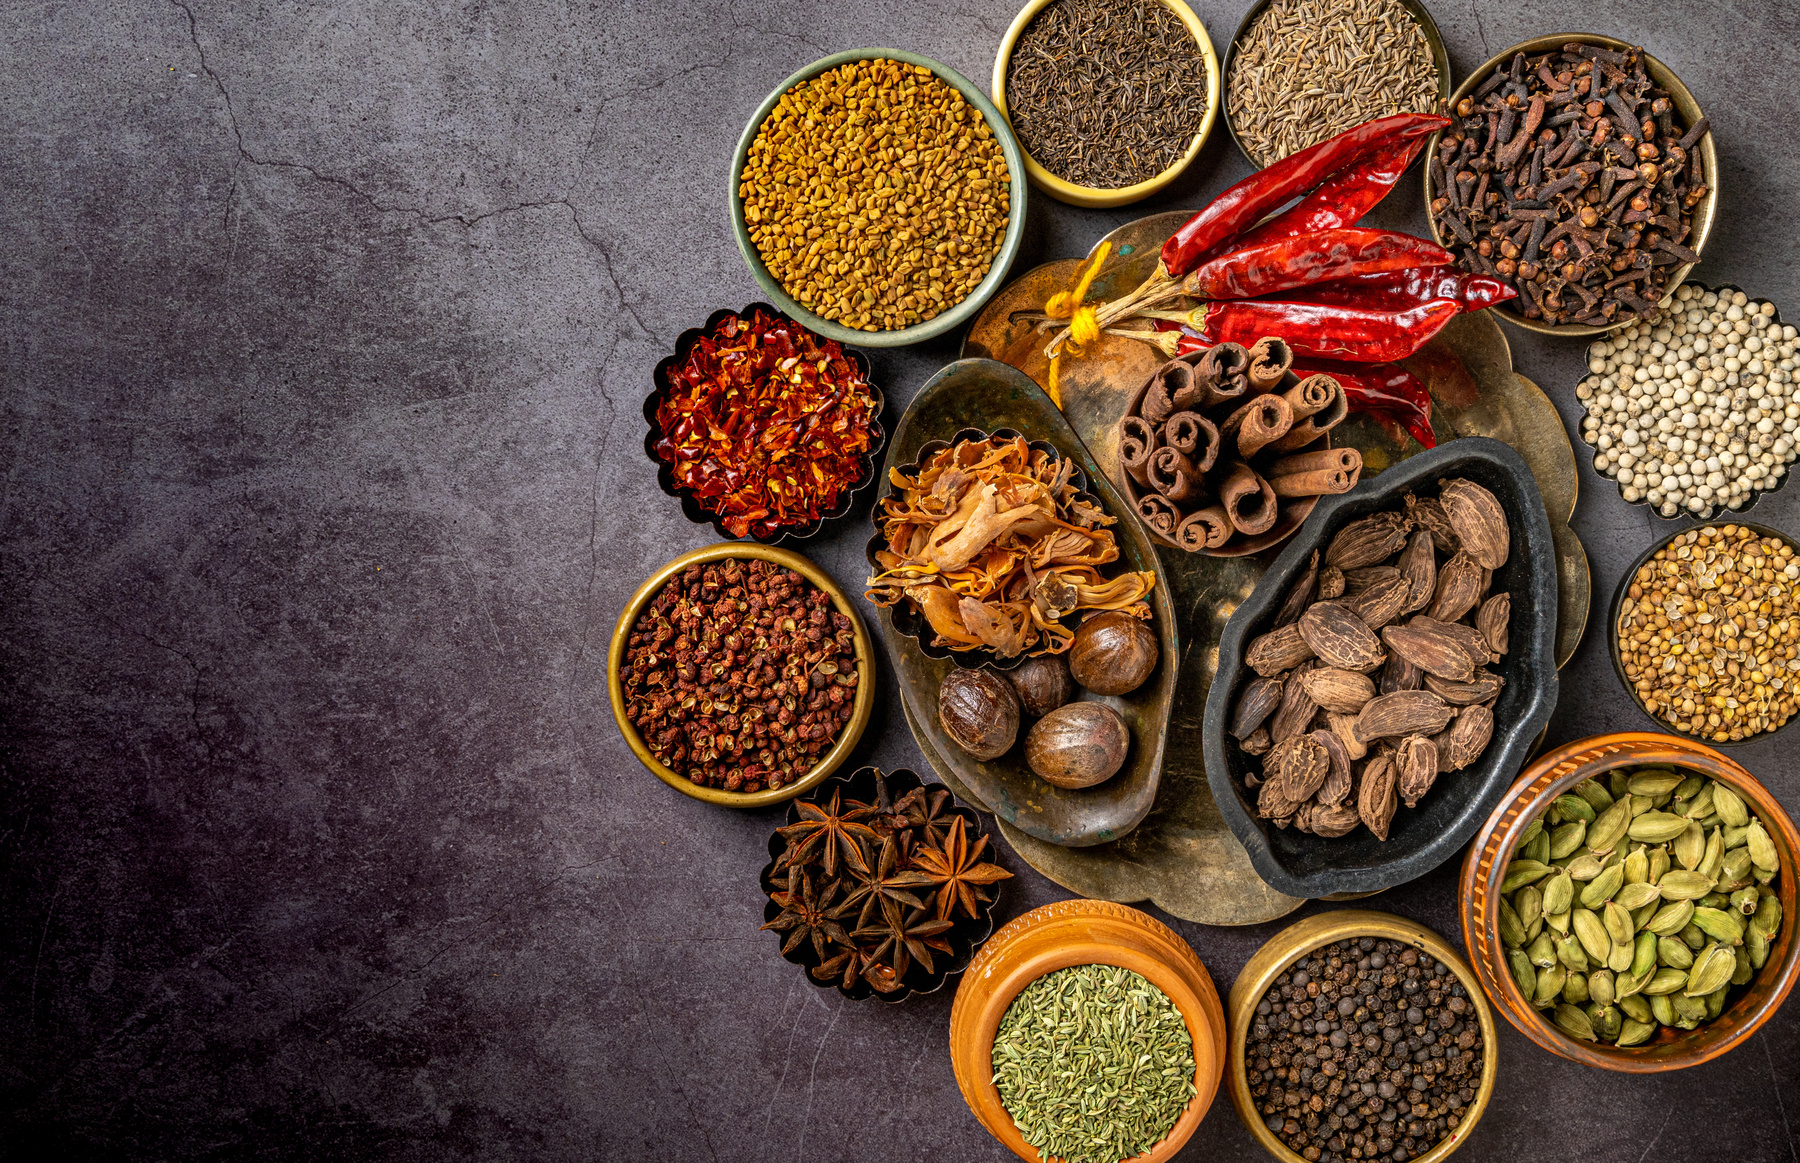 Assorted Indian spices including turmeric, cumin, coriander, and chili powder, etc.